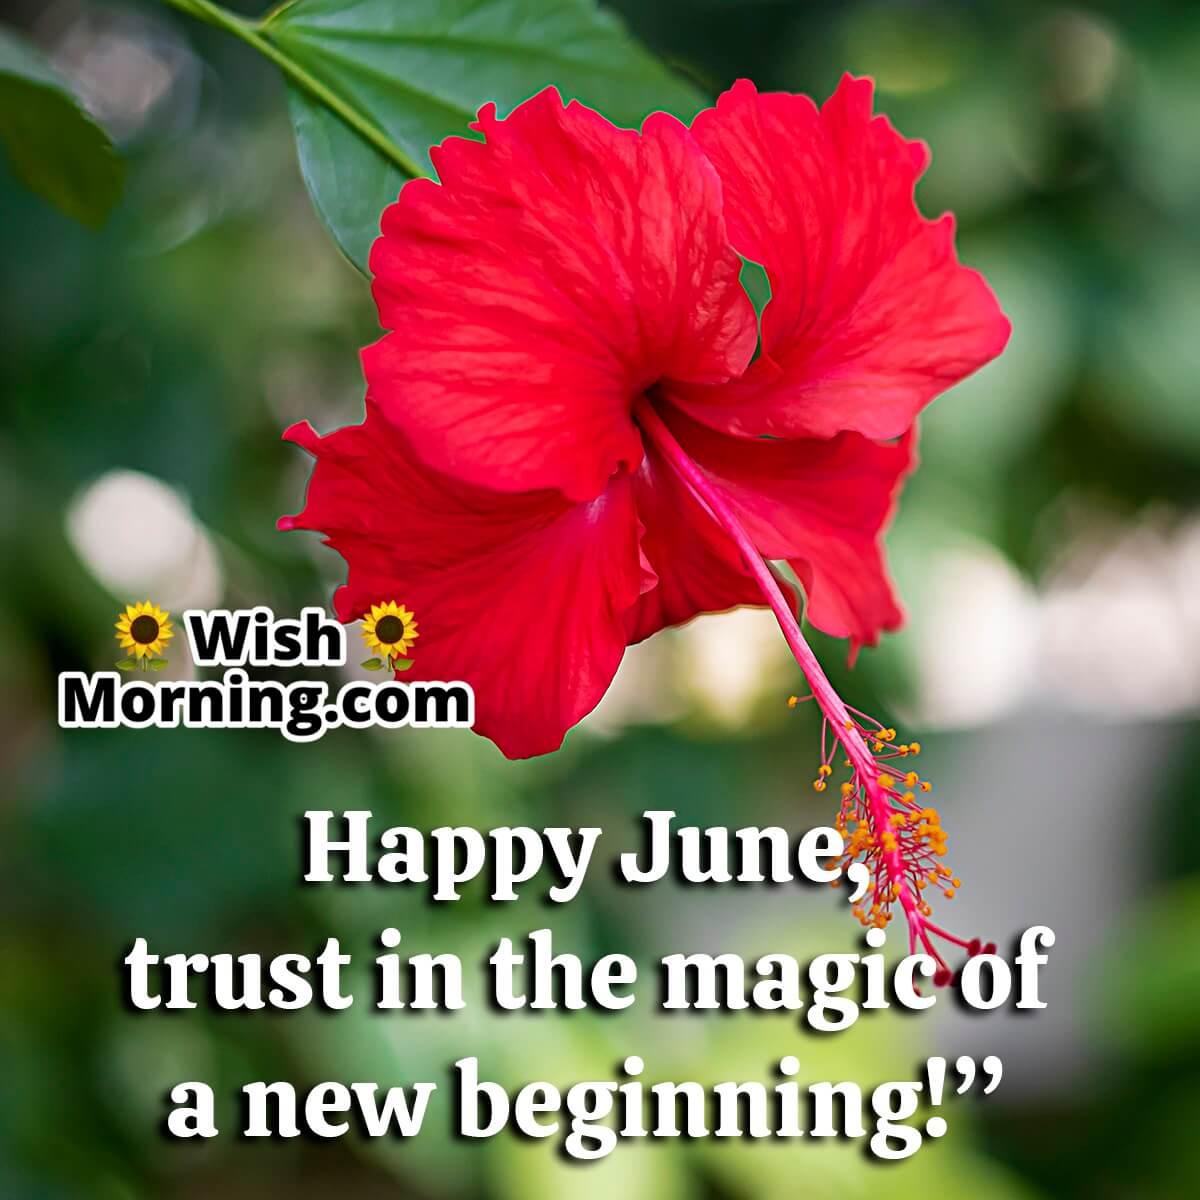 Hello, June, Trust In The Magic Of A New Beginning!”